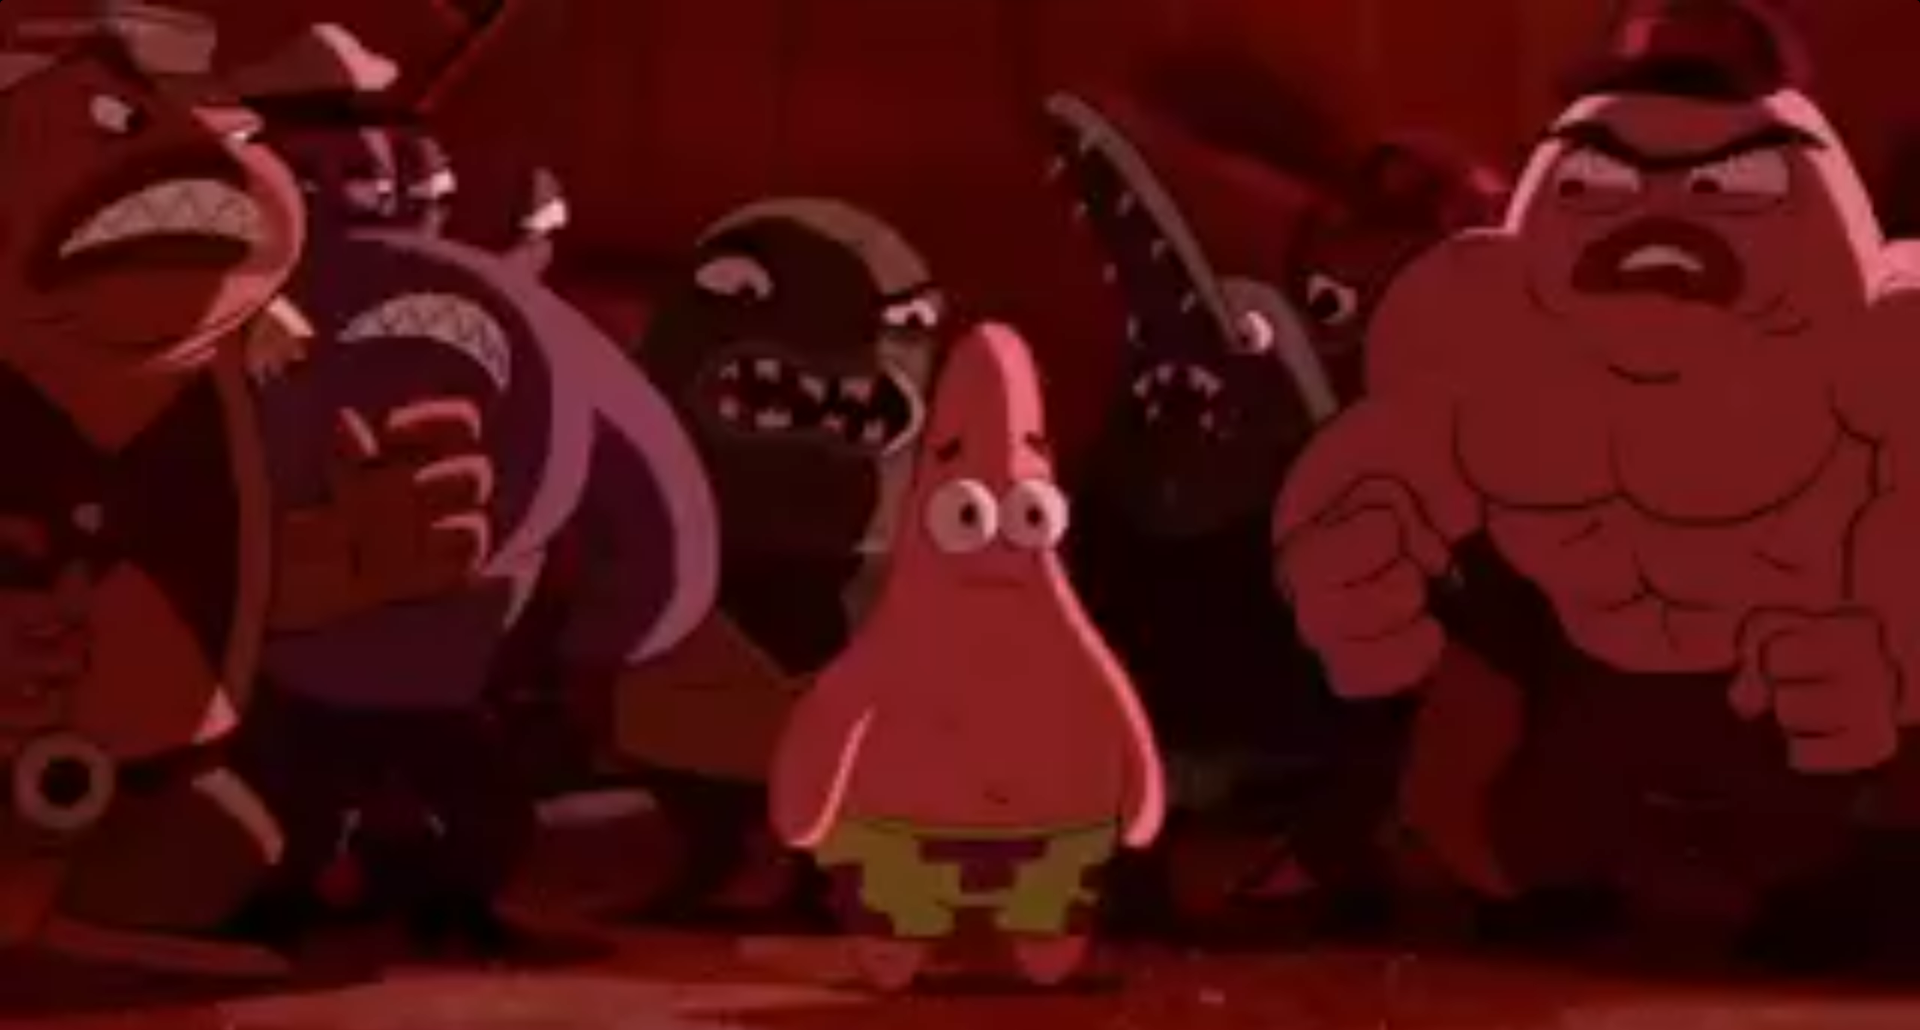 Patrick Being Surrounded Blank Meme Template